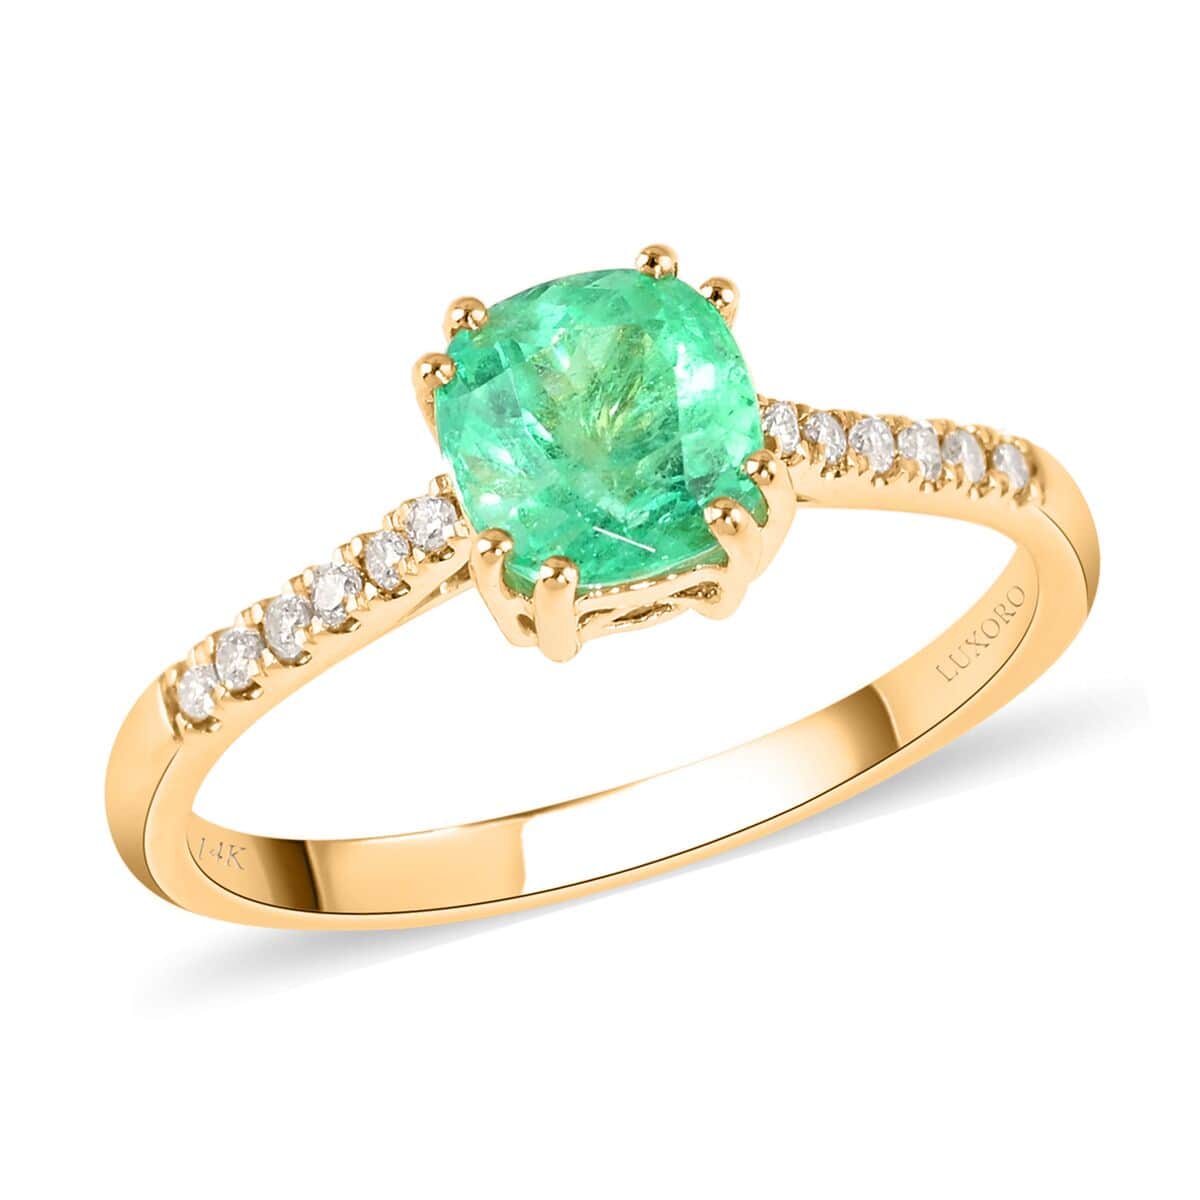 Certified & Appraised Luxoro 14K Yellow Gold AAA Boyaca Colombian Emerald and G-H I2 Diamond Ring (Size 7.0) 1.10 ctw image number 0